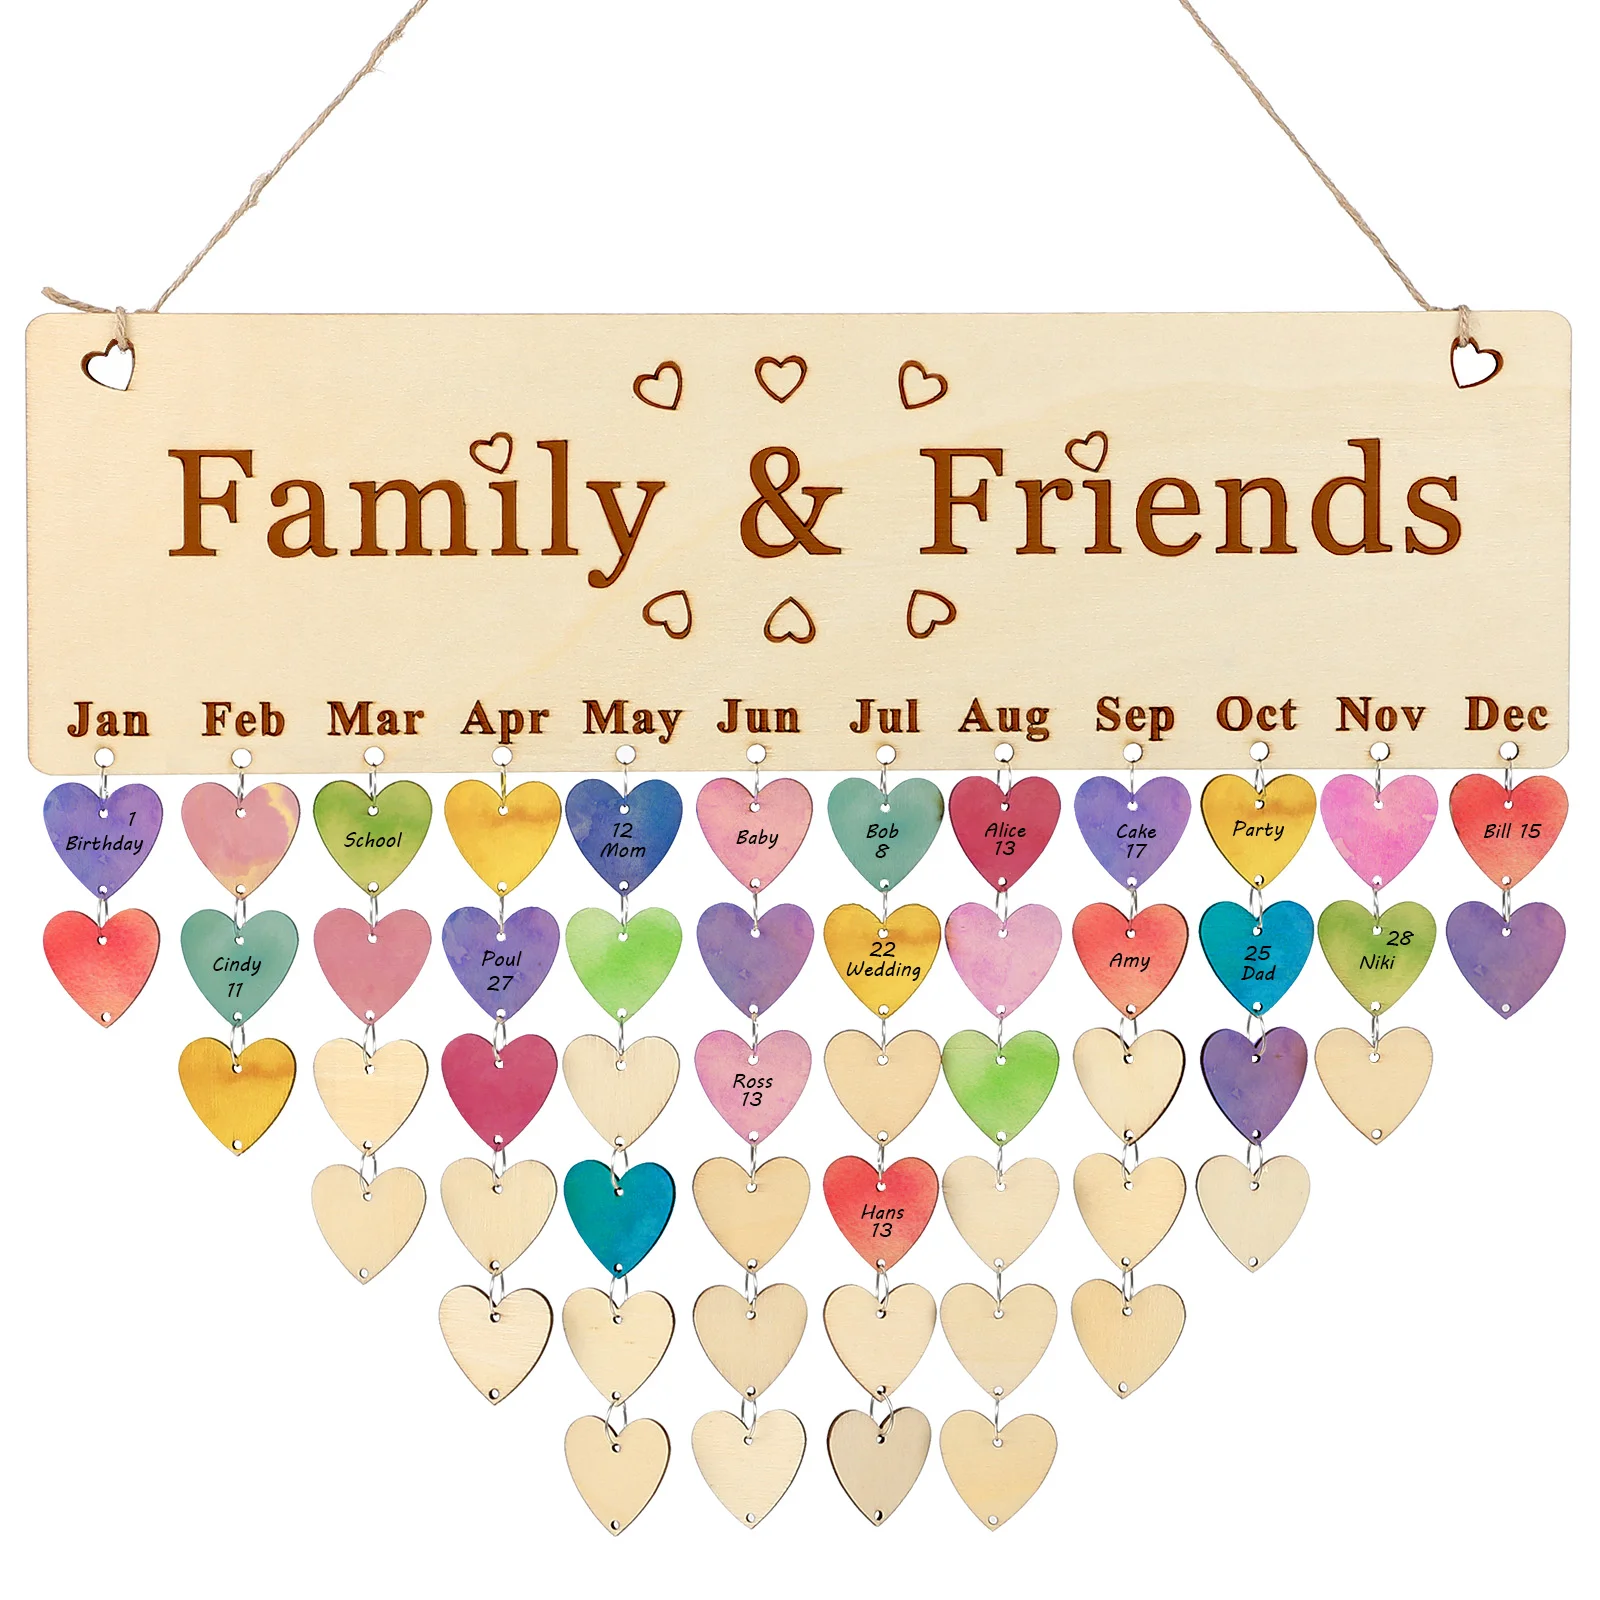 Wall Hanging Home Decoration Creative Family Birthday Calendar Plaque with Tags Family Birthday Board with Tags home deocr calendar hanging decoration family birthday calendar with tags hanging birthday calendar birthday wall calendar